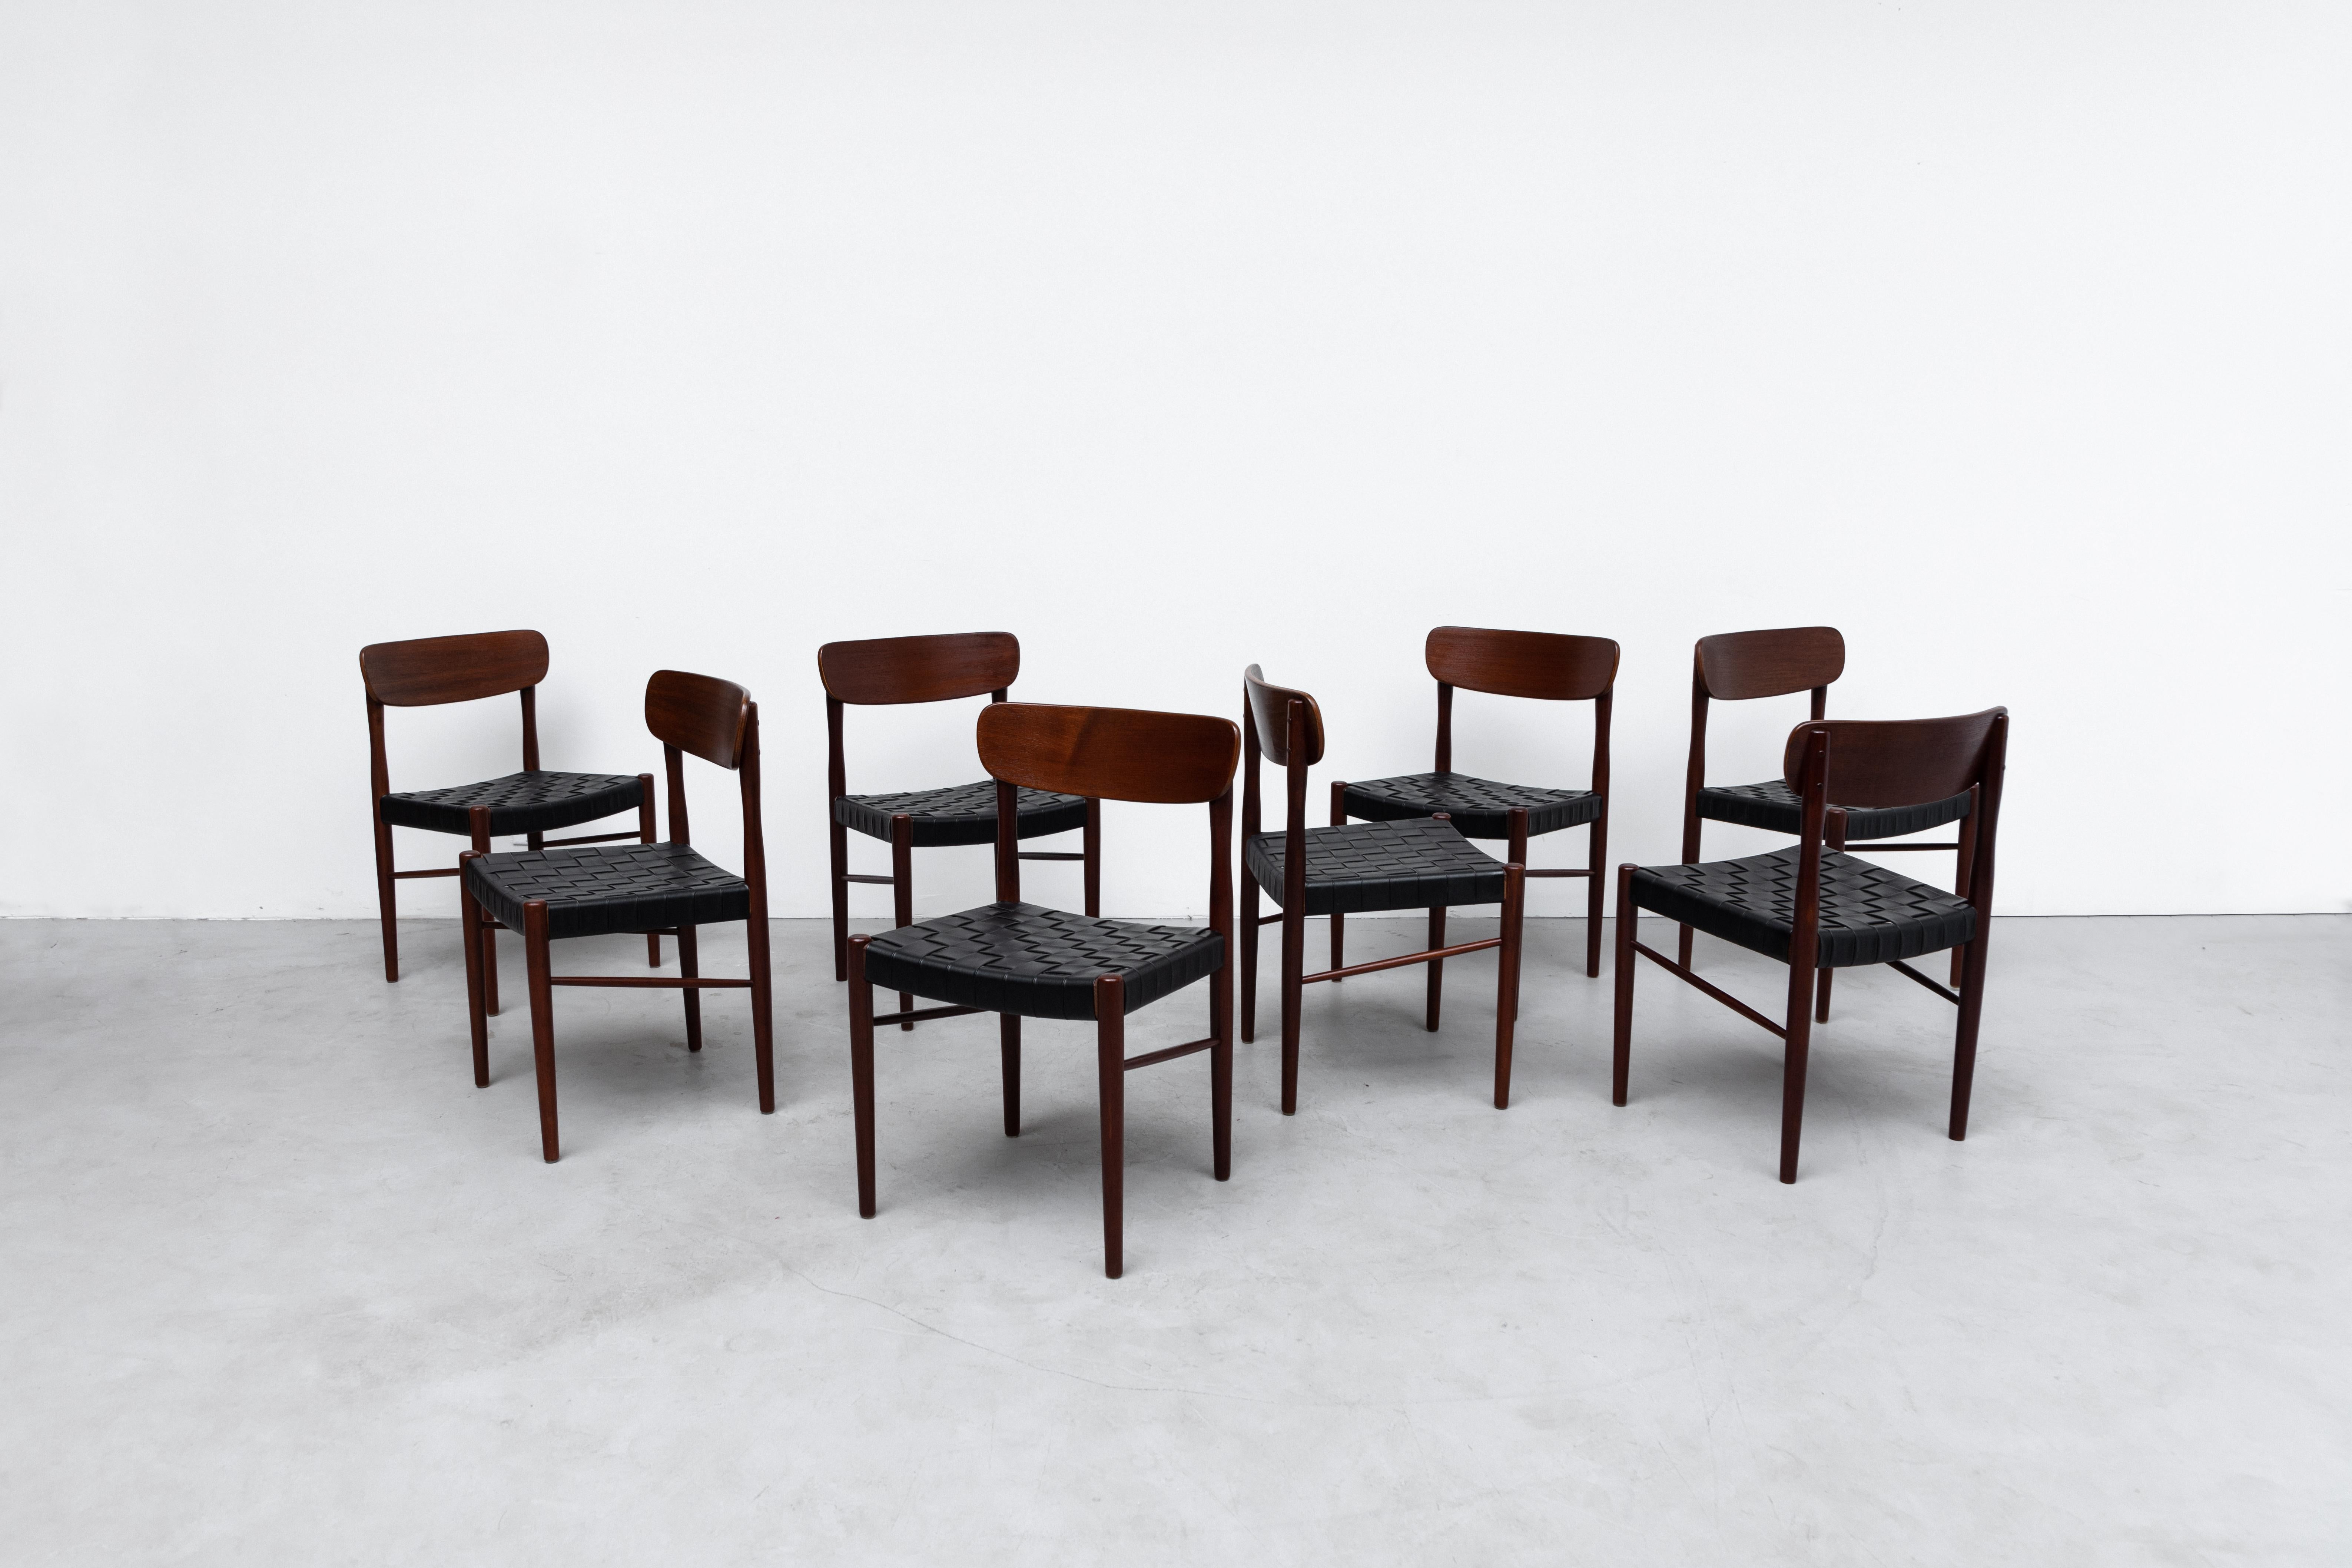 Gorgeous set of 8 Børge Mogensen style Danish dining chairs with black woven faux leather seating and lightly refinished teak frame. In good overall condition with some wear consistent with age and use. Set price.